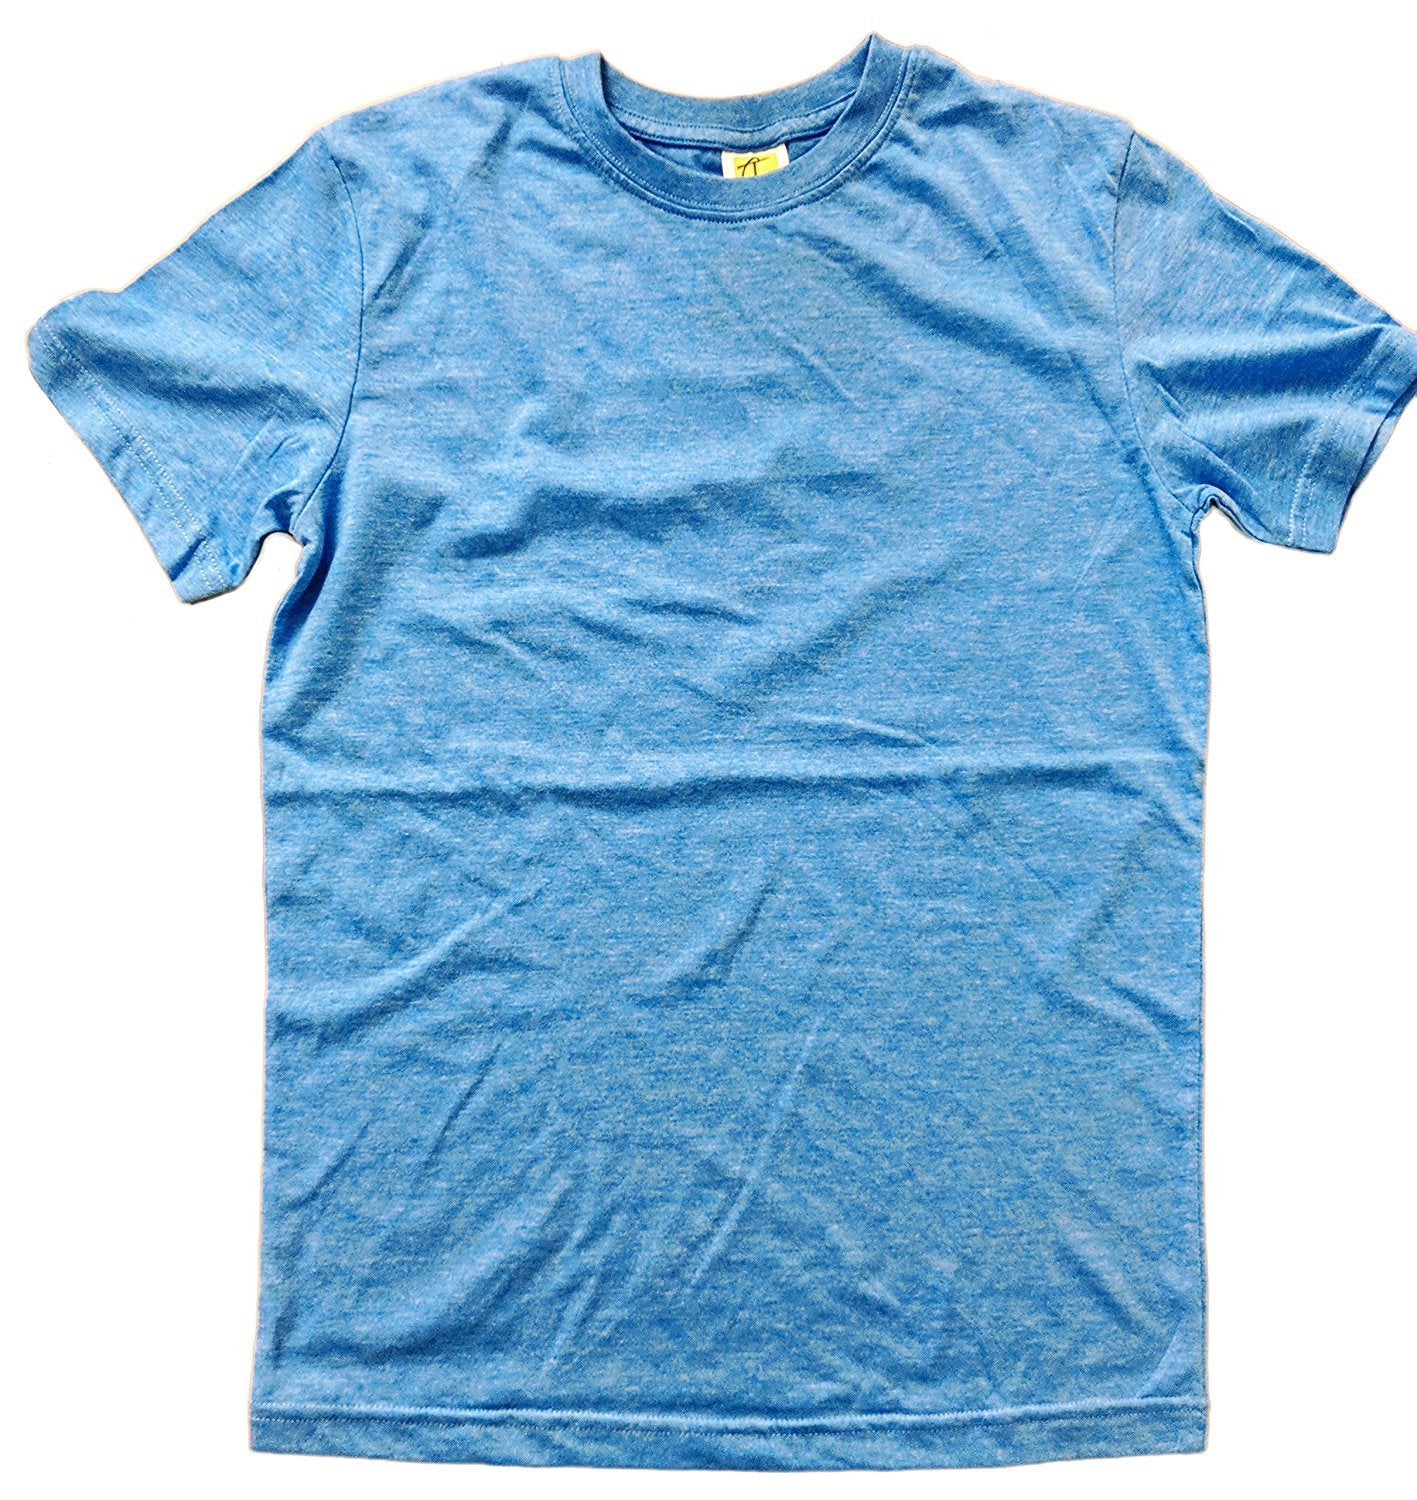 Tulo & Garn Mens Heather Color Cotton Poly Blend 60/40 Tee